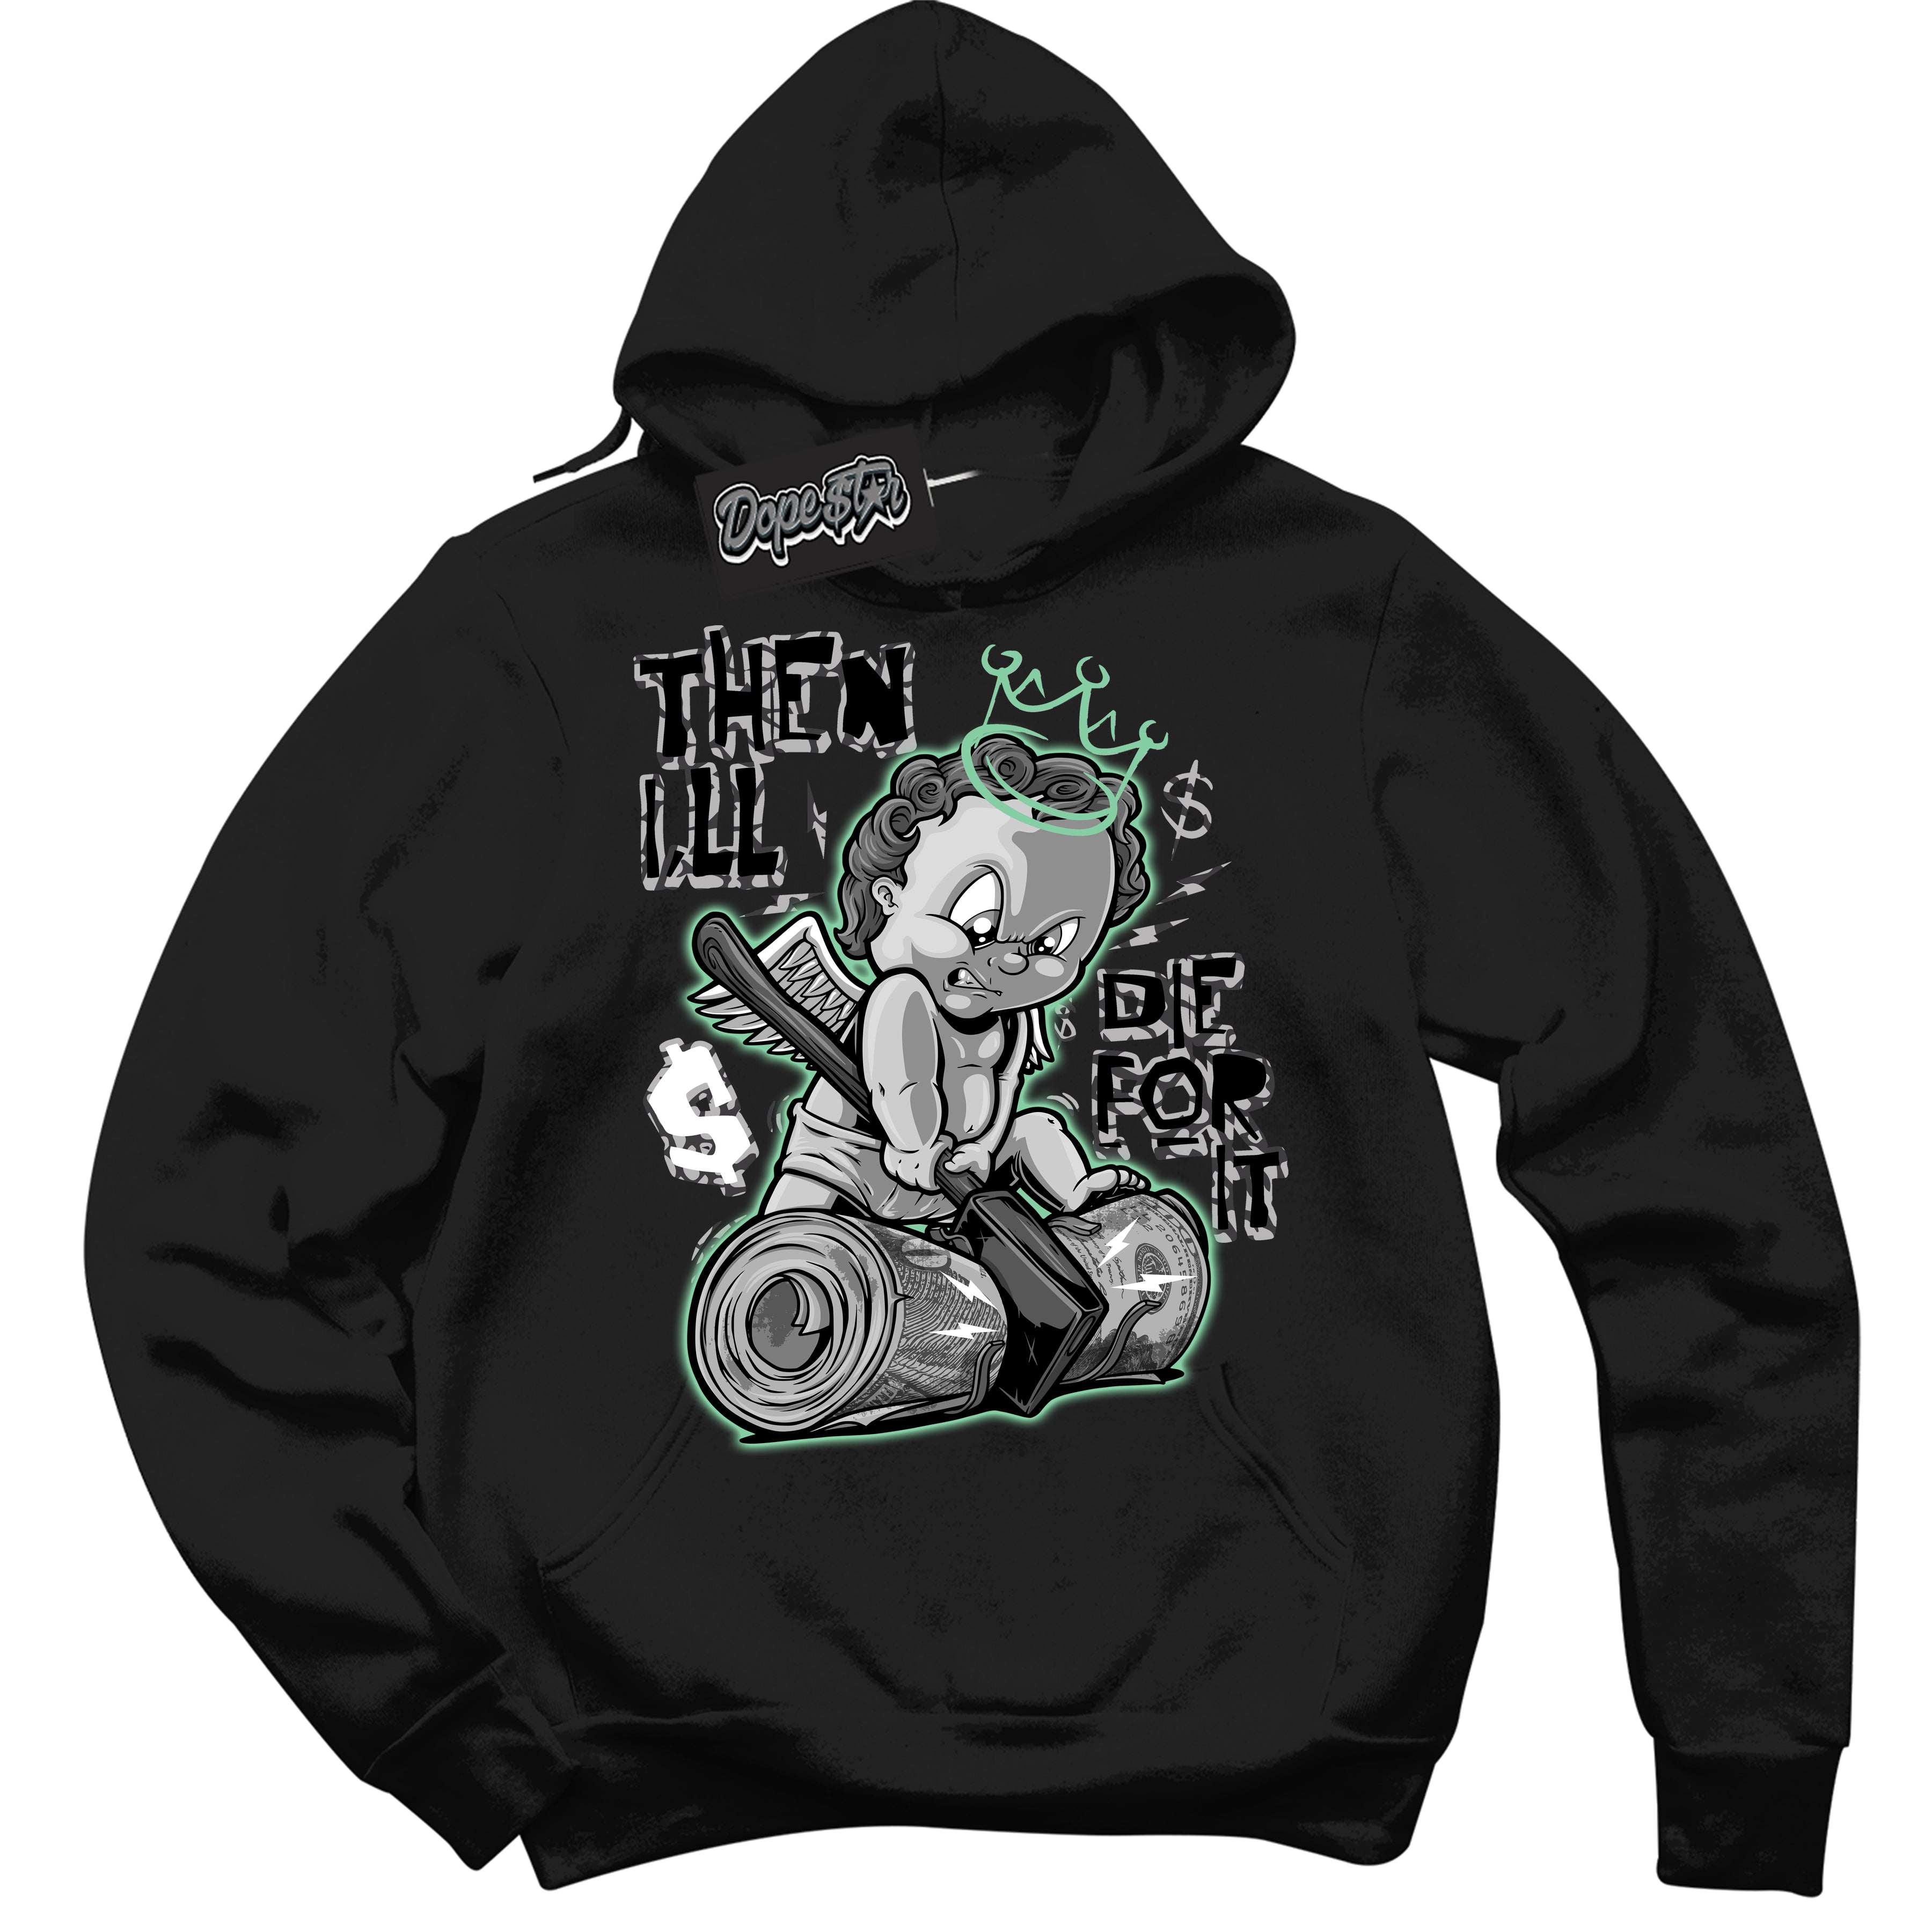 Cool Black Graphic DopeStar Hoodie with “ Then I'll “ print, that perfectly matches Green Glow 3S sneakers